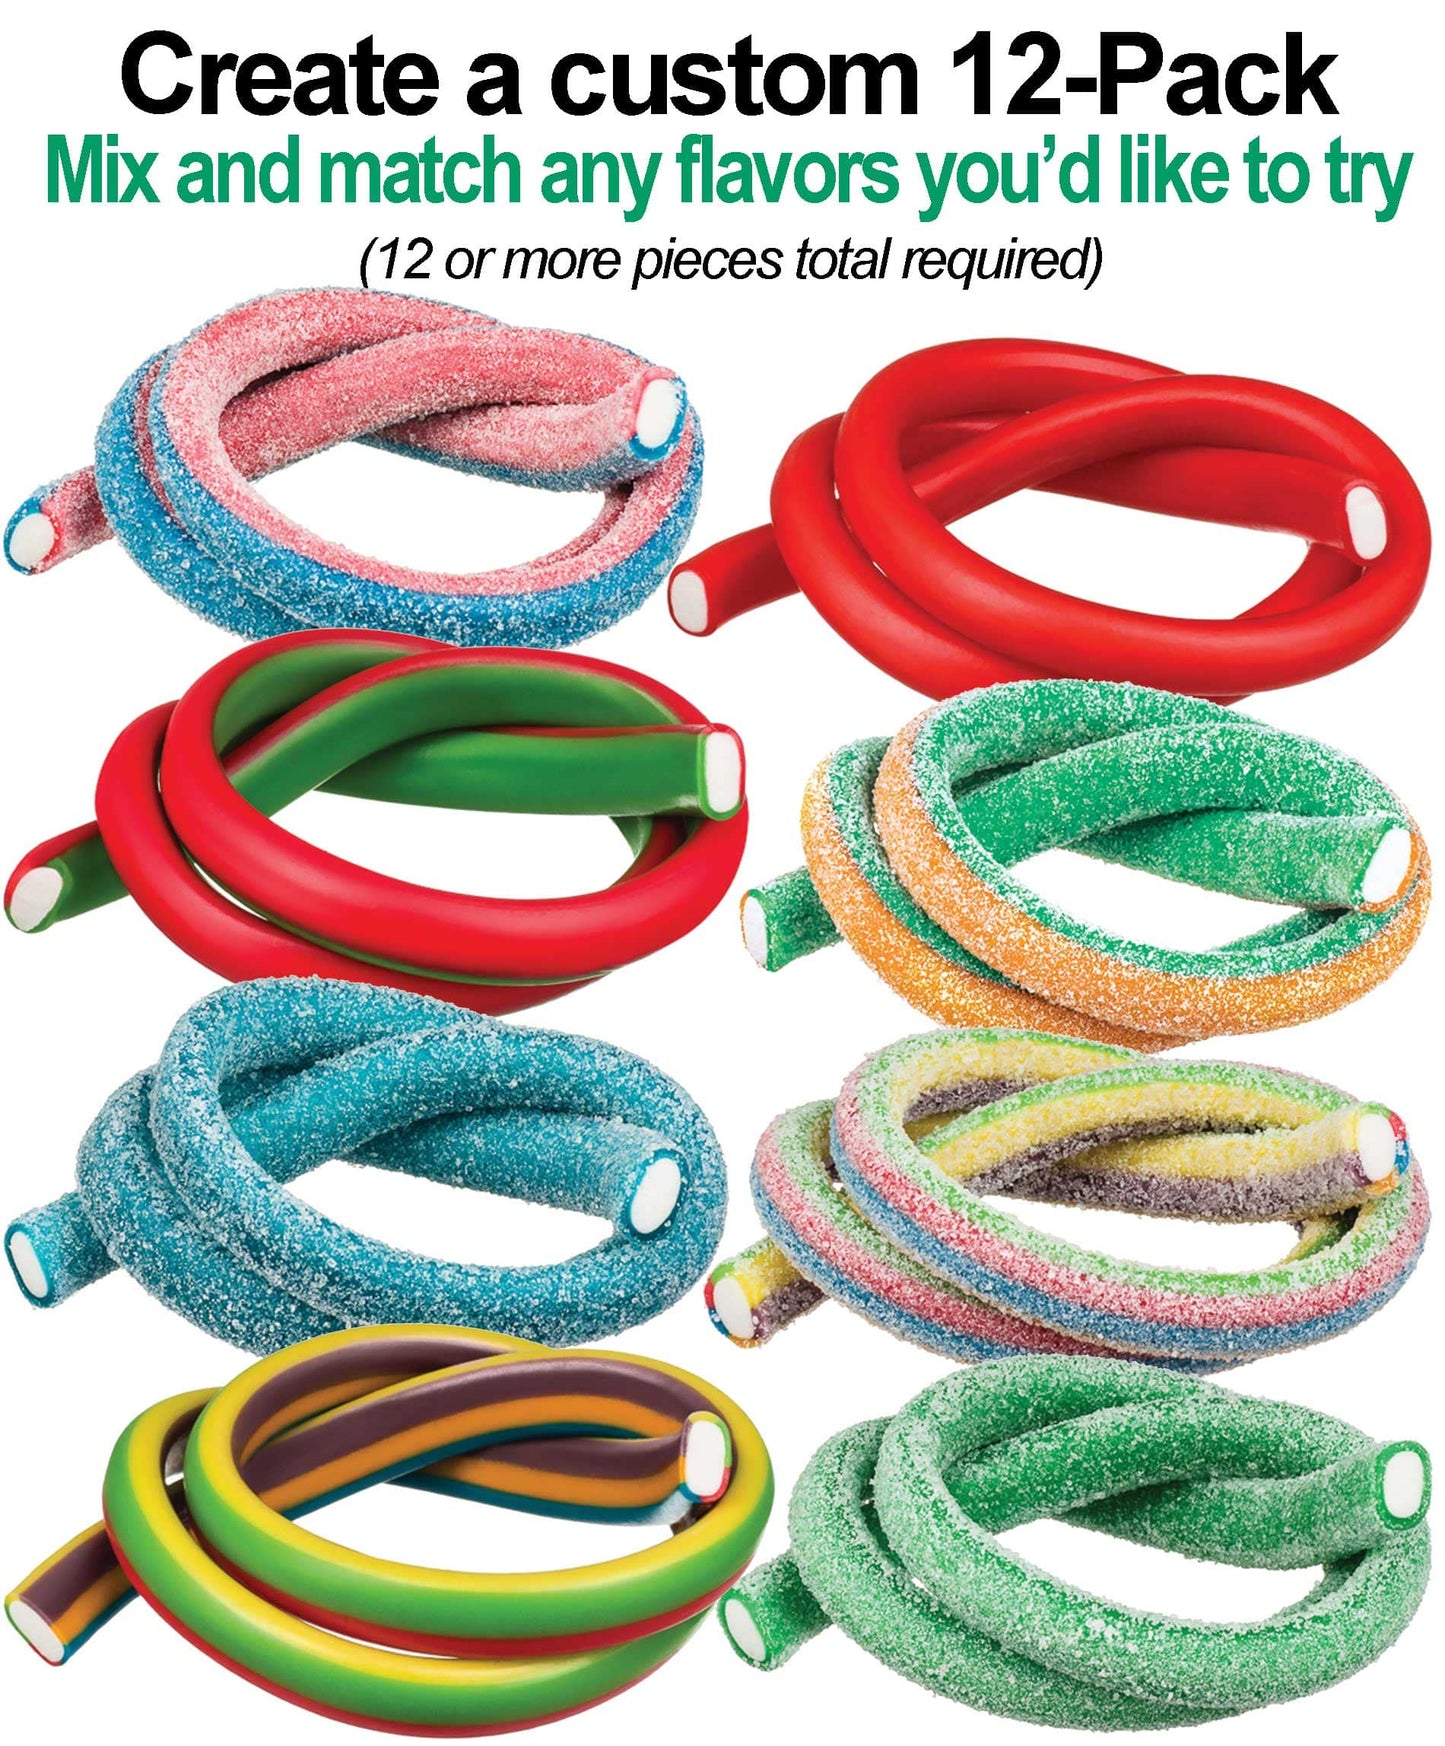 Meeega Cables Gummy Rope Meeega Cables European Chewy Rope Candy - Custom 12-Pack individually wrapped Meeega Cables, each over 2-feet long cups with lids and straws